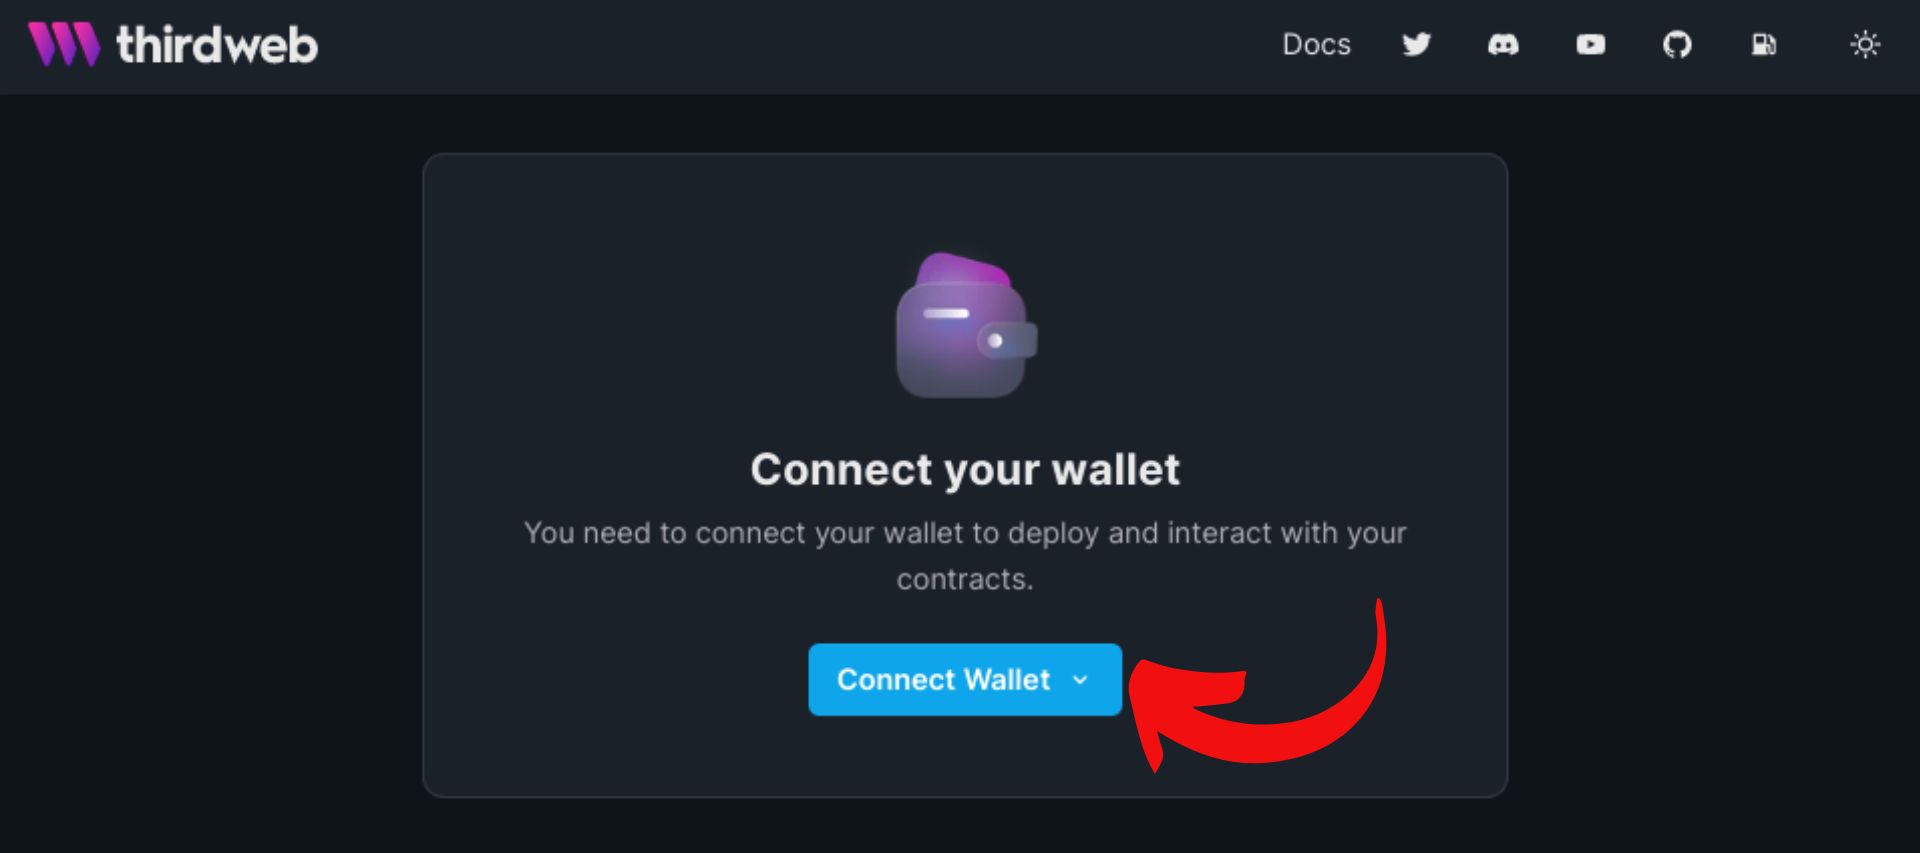 how to connect your metamask wallet to thirdweb to make your own nft collection without any code or needing to hire a developer